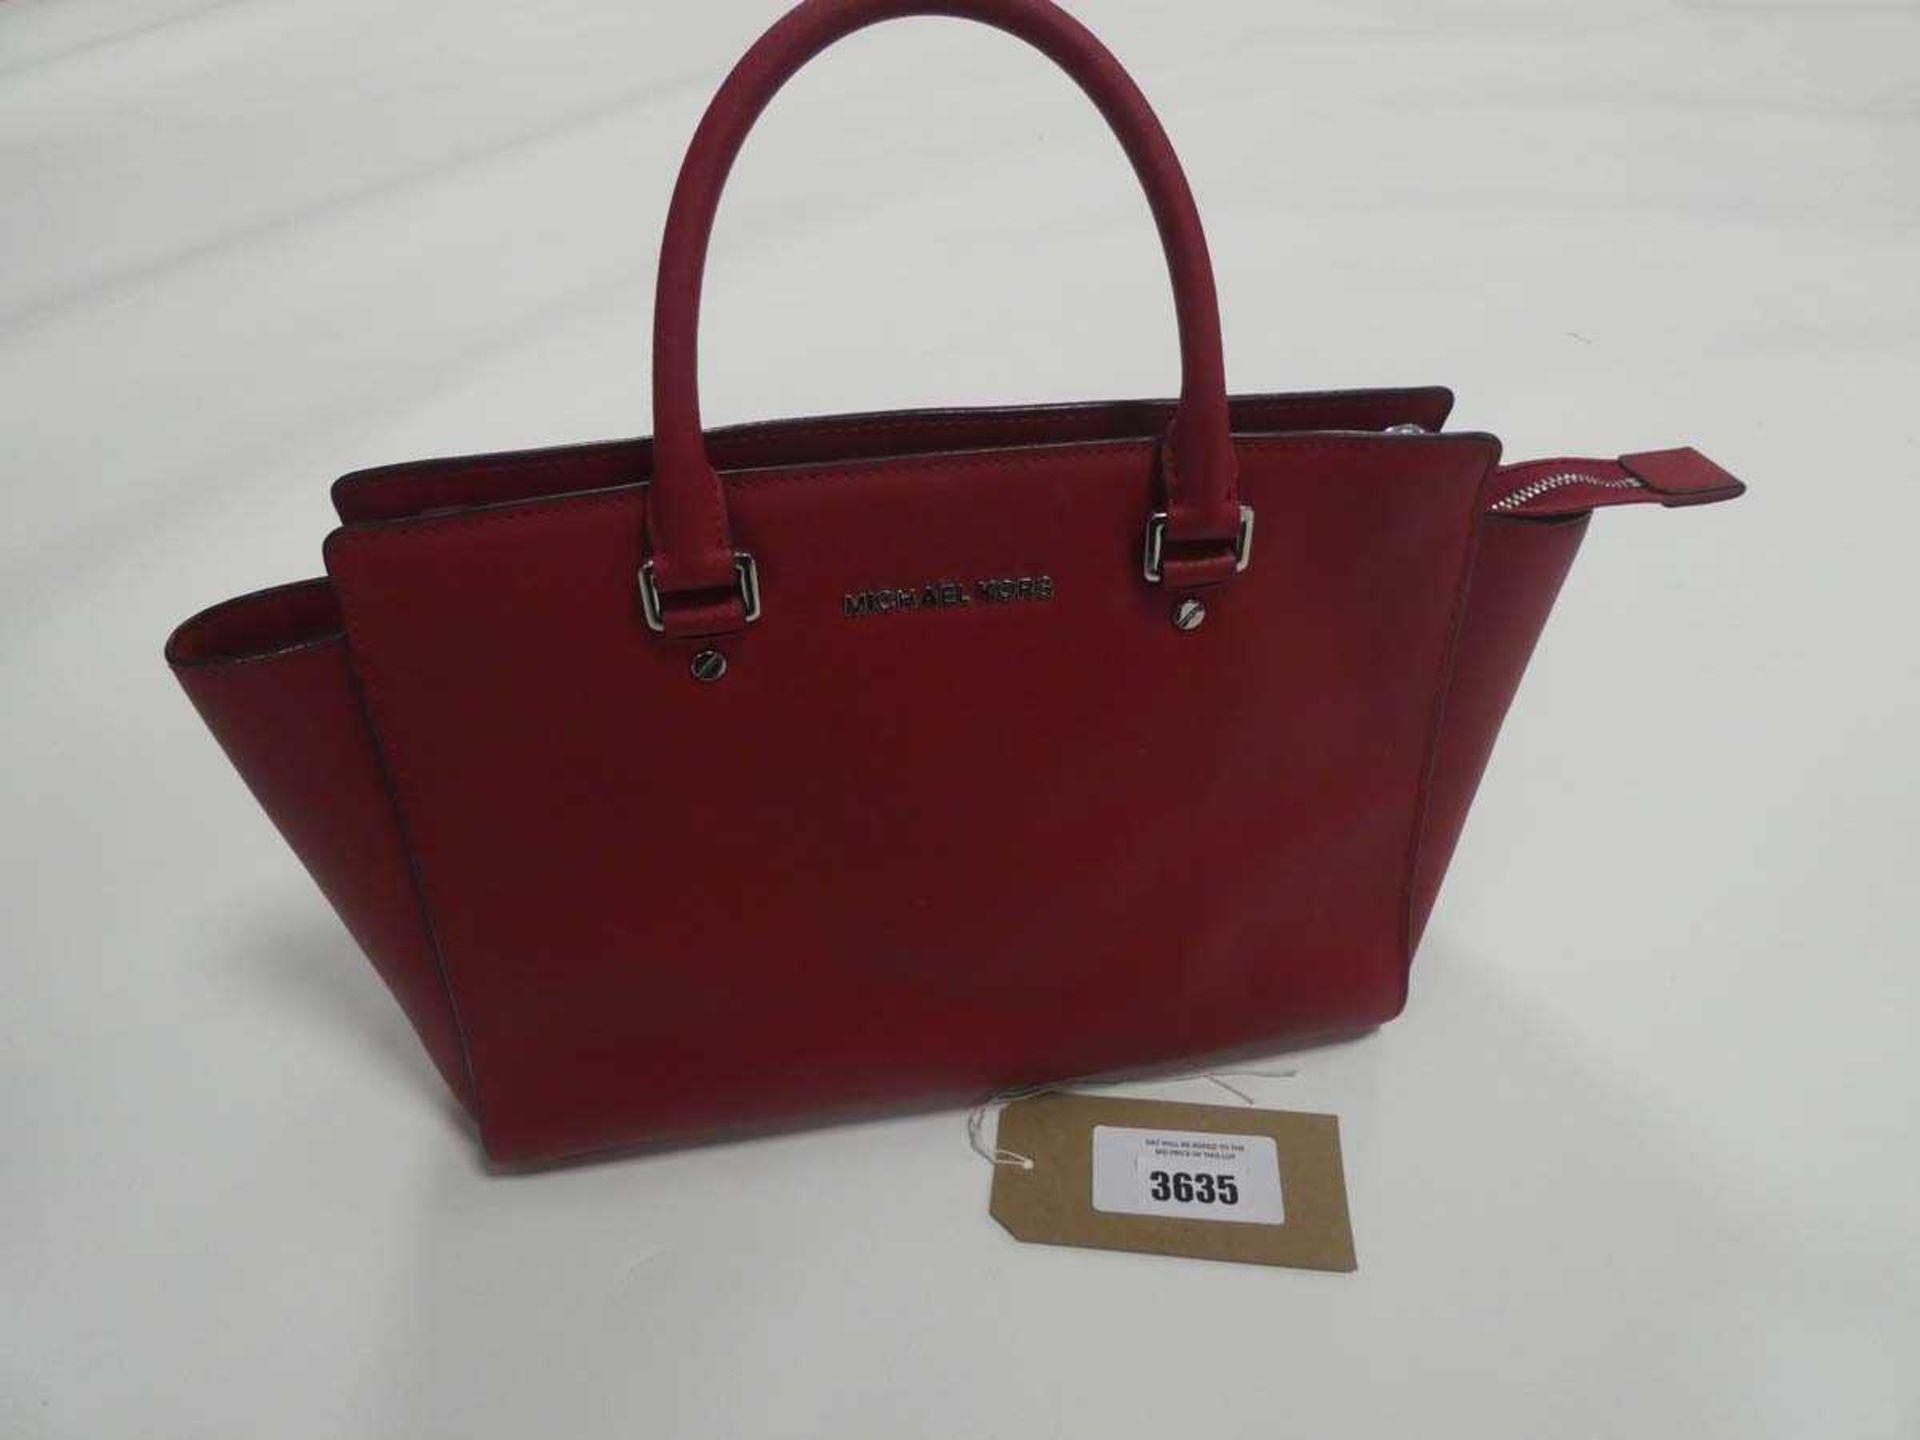 +VAT Michael Kors large handbag in red with dust bag (signs of wear)